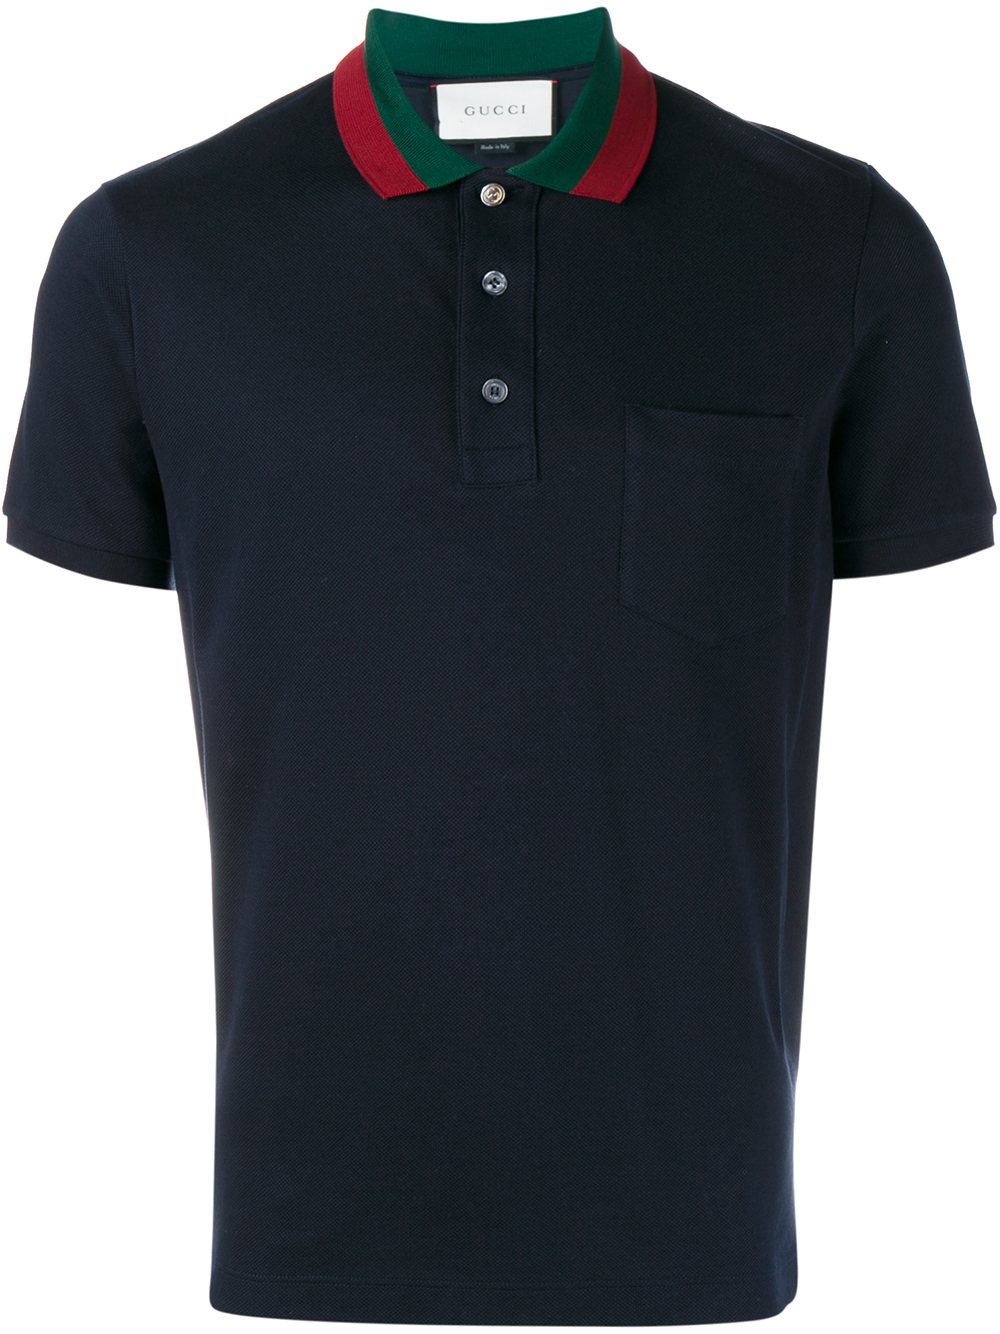 Lyst - Gucci Striped Collar Polo T-shirt in Blue for Men